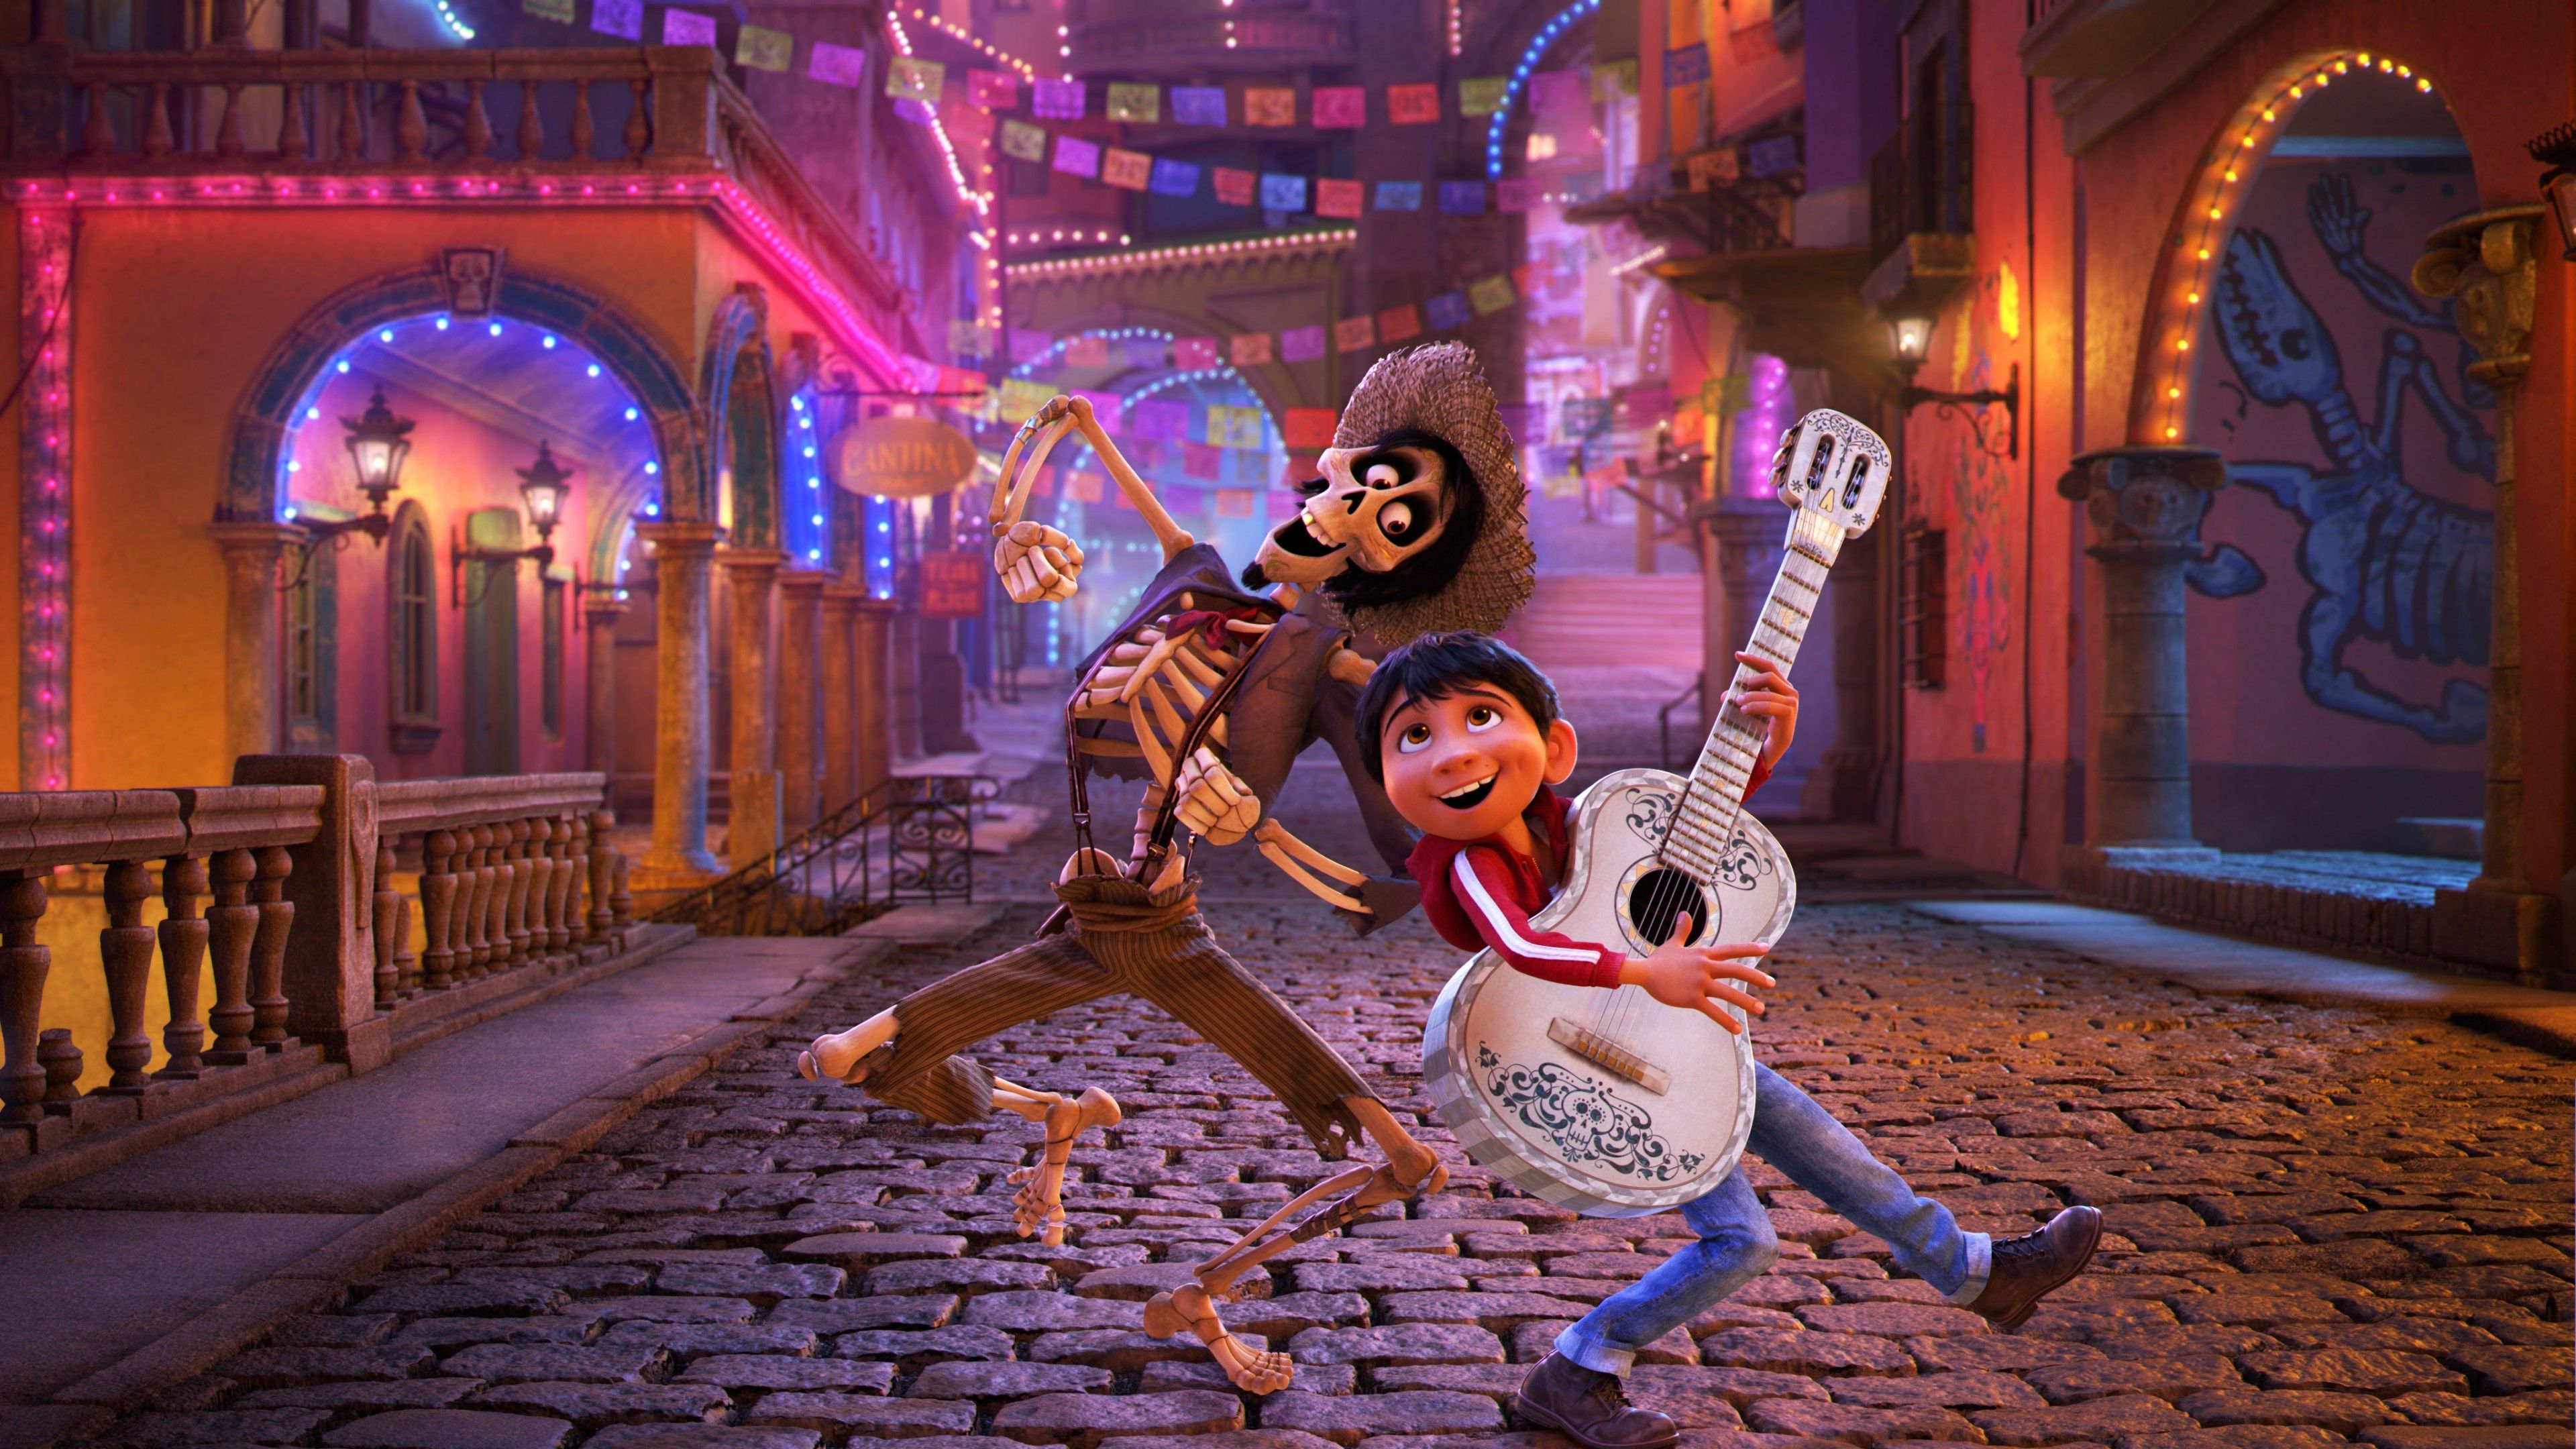 Download Wallpaper Hector, Miguel Rivera, 4k, 3D Animation, Disney, 2017 Movies, Coco For Desktop With Resolution 3840x2160. High Quality HD Picture Wallpaper